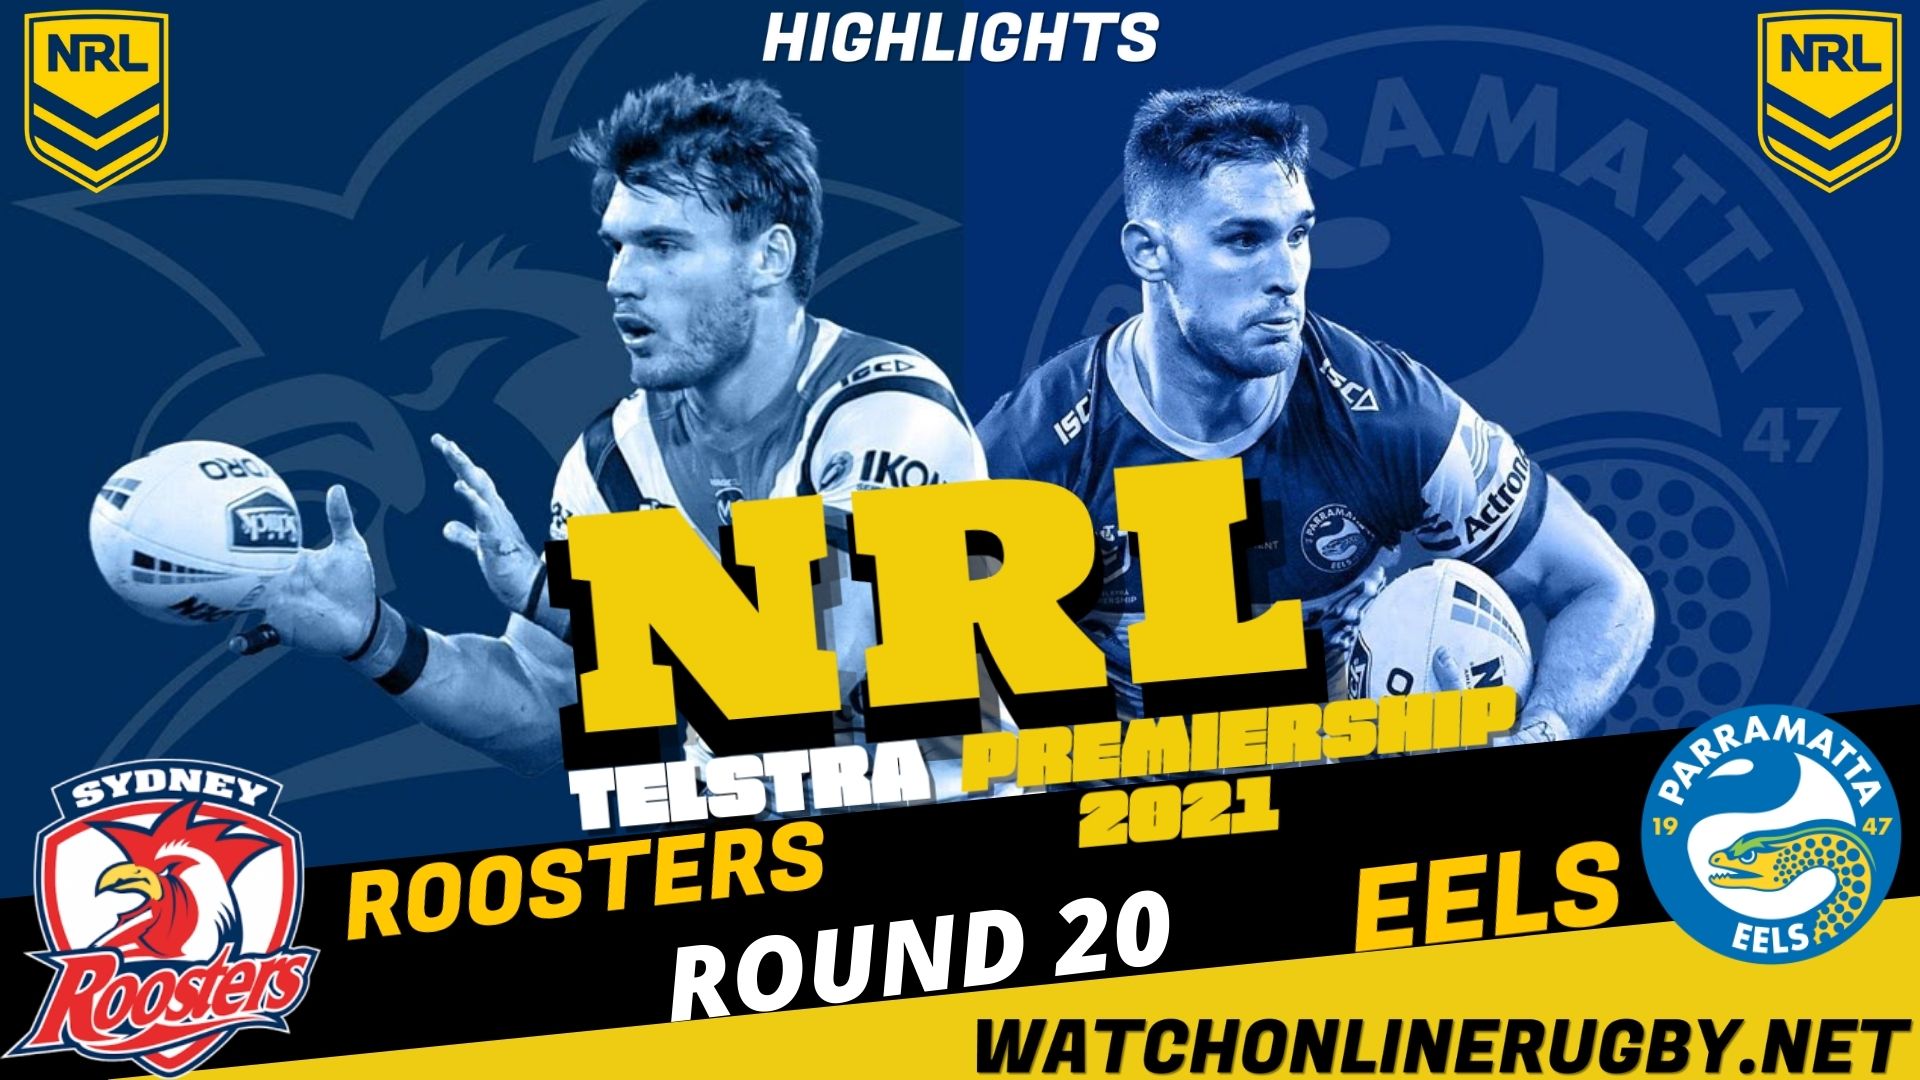 Roosters Vs Eels Highlights RD 20 NRL Rugby